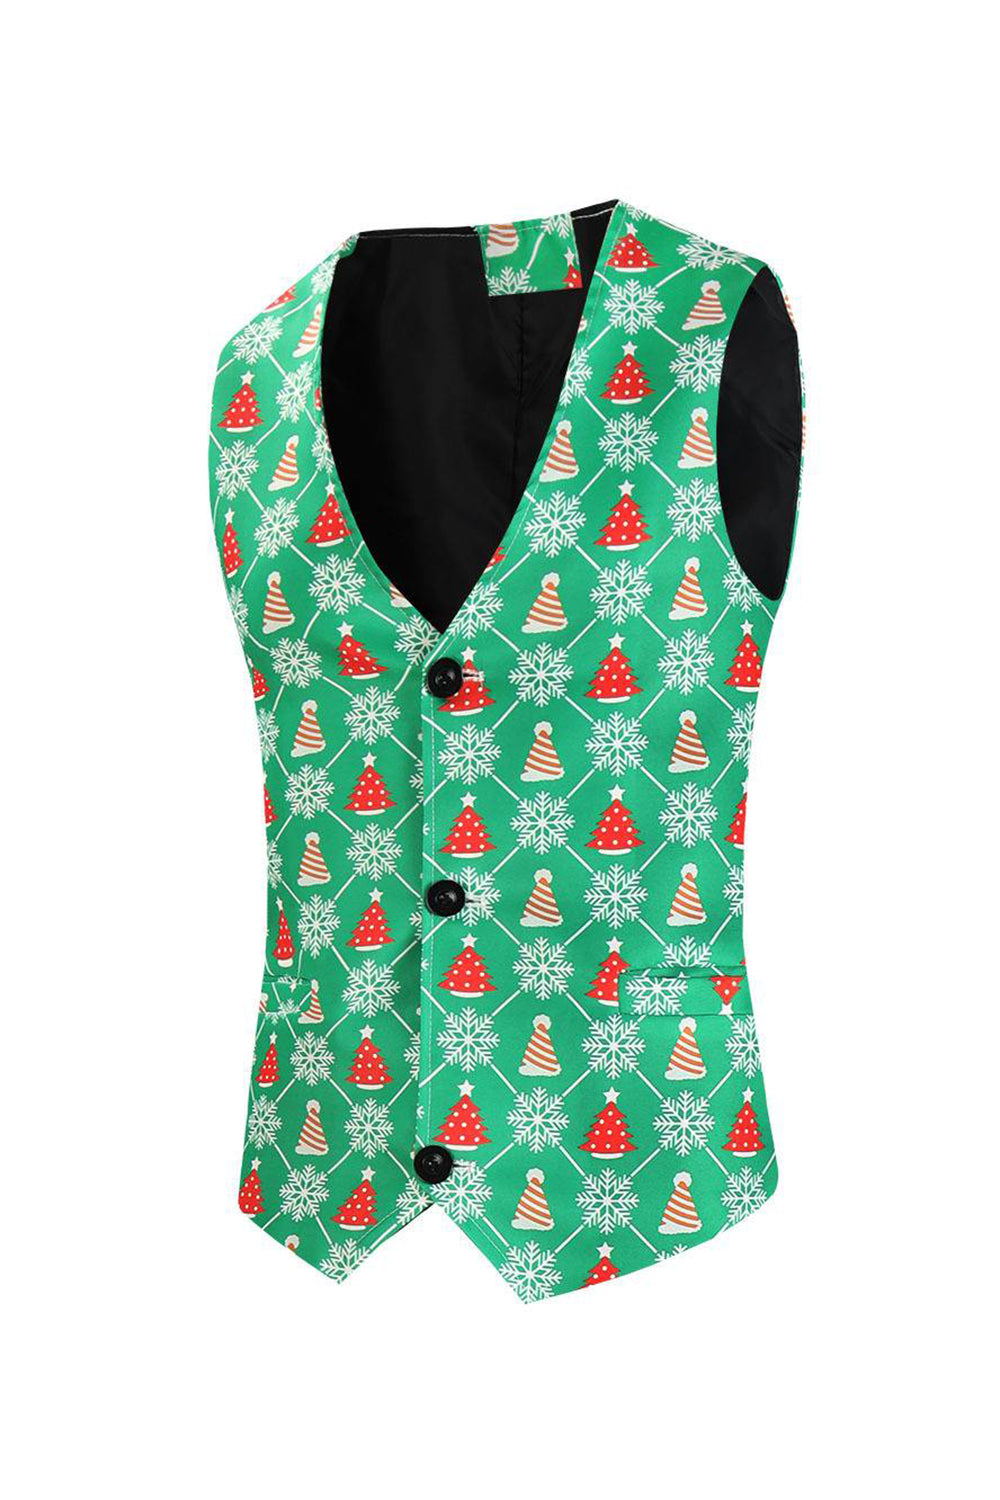 Green Christmas Tree Single Breasted Men's Suit Vest